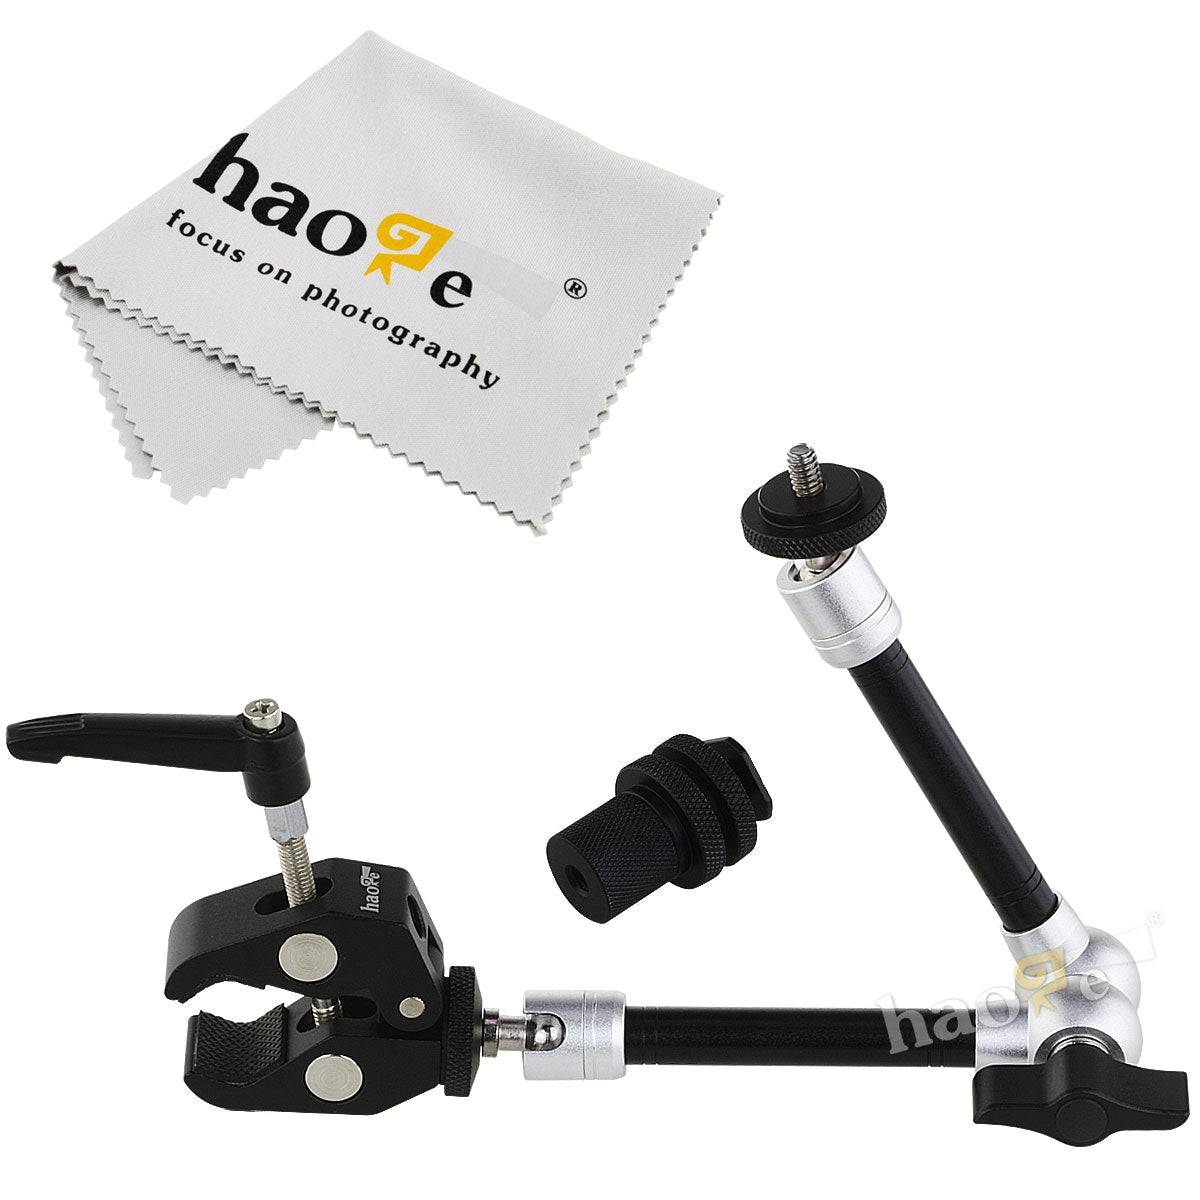 Haoge 11 inch Articulating Friction Magic Arm with Small Clamp Crab Pliers Clip for HDMI LCD Monitor LED Light DSLR Camera Video Tripod